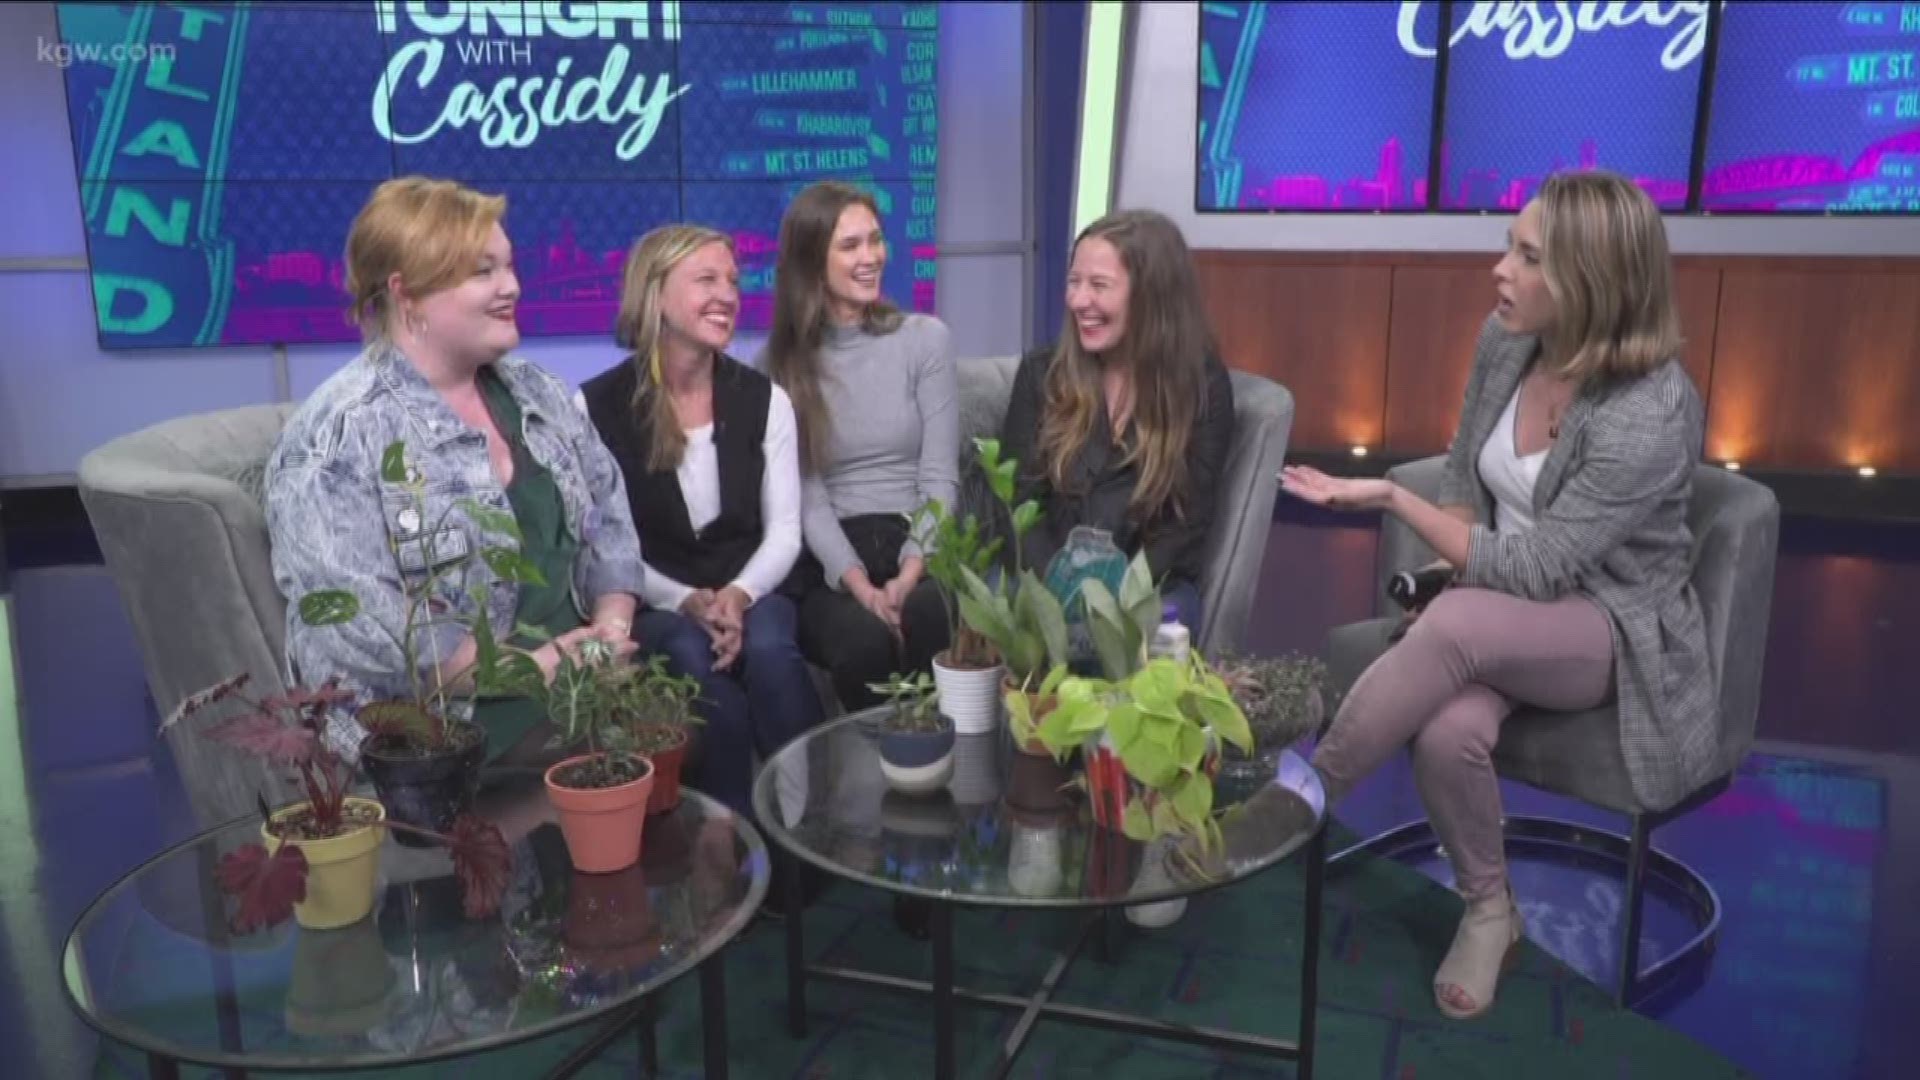 The Plant Doctors help you get your plants ready for colder temps and reveal hacks that can help you be a good plant parent.
theplantdocs.com
#TonightwithCassidy